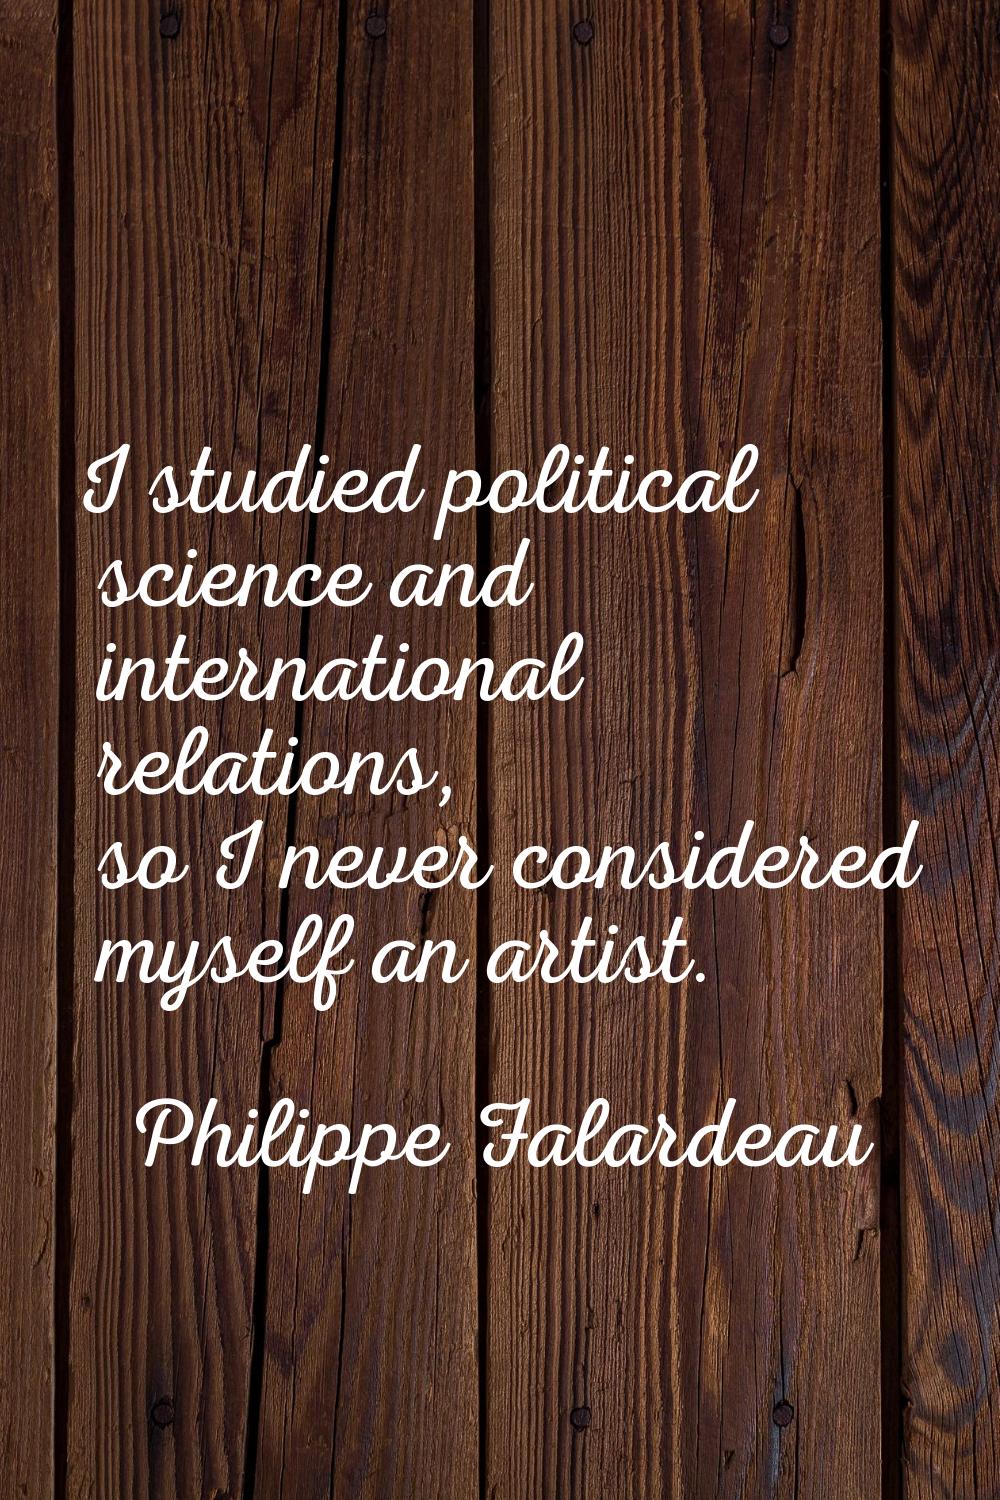 I studied political science and international relations, so I never considered myself an artist.